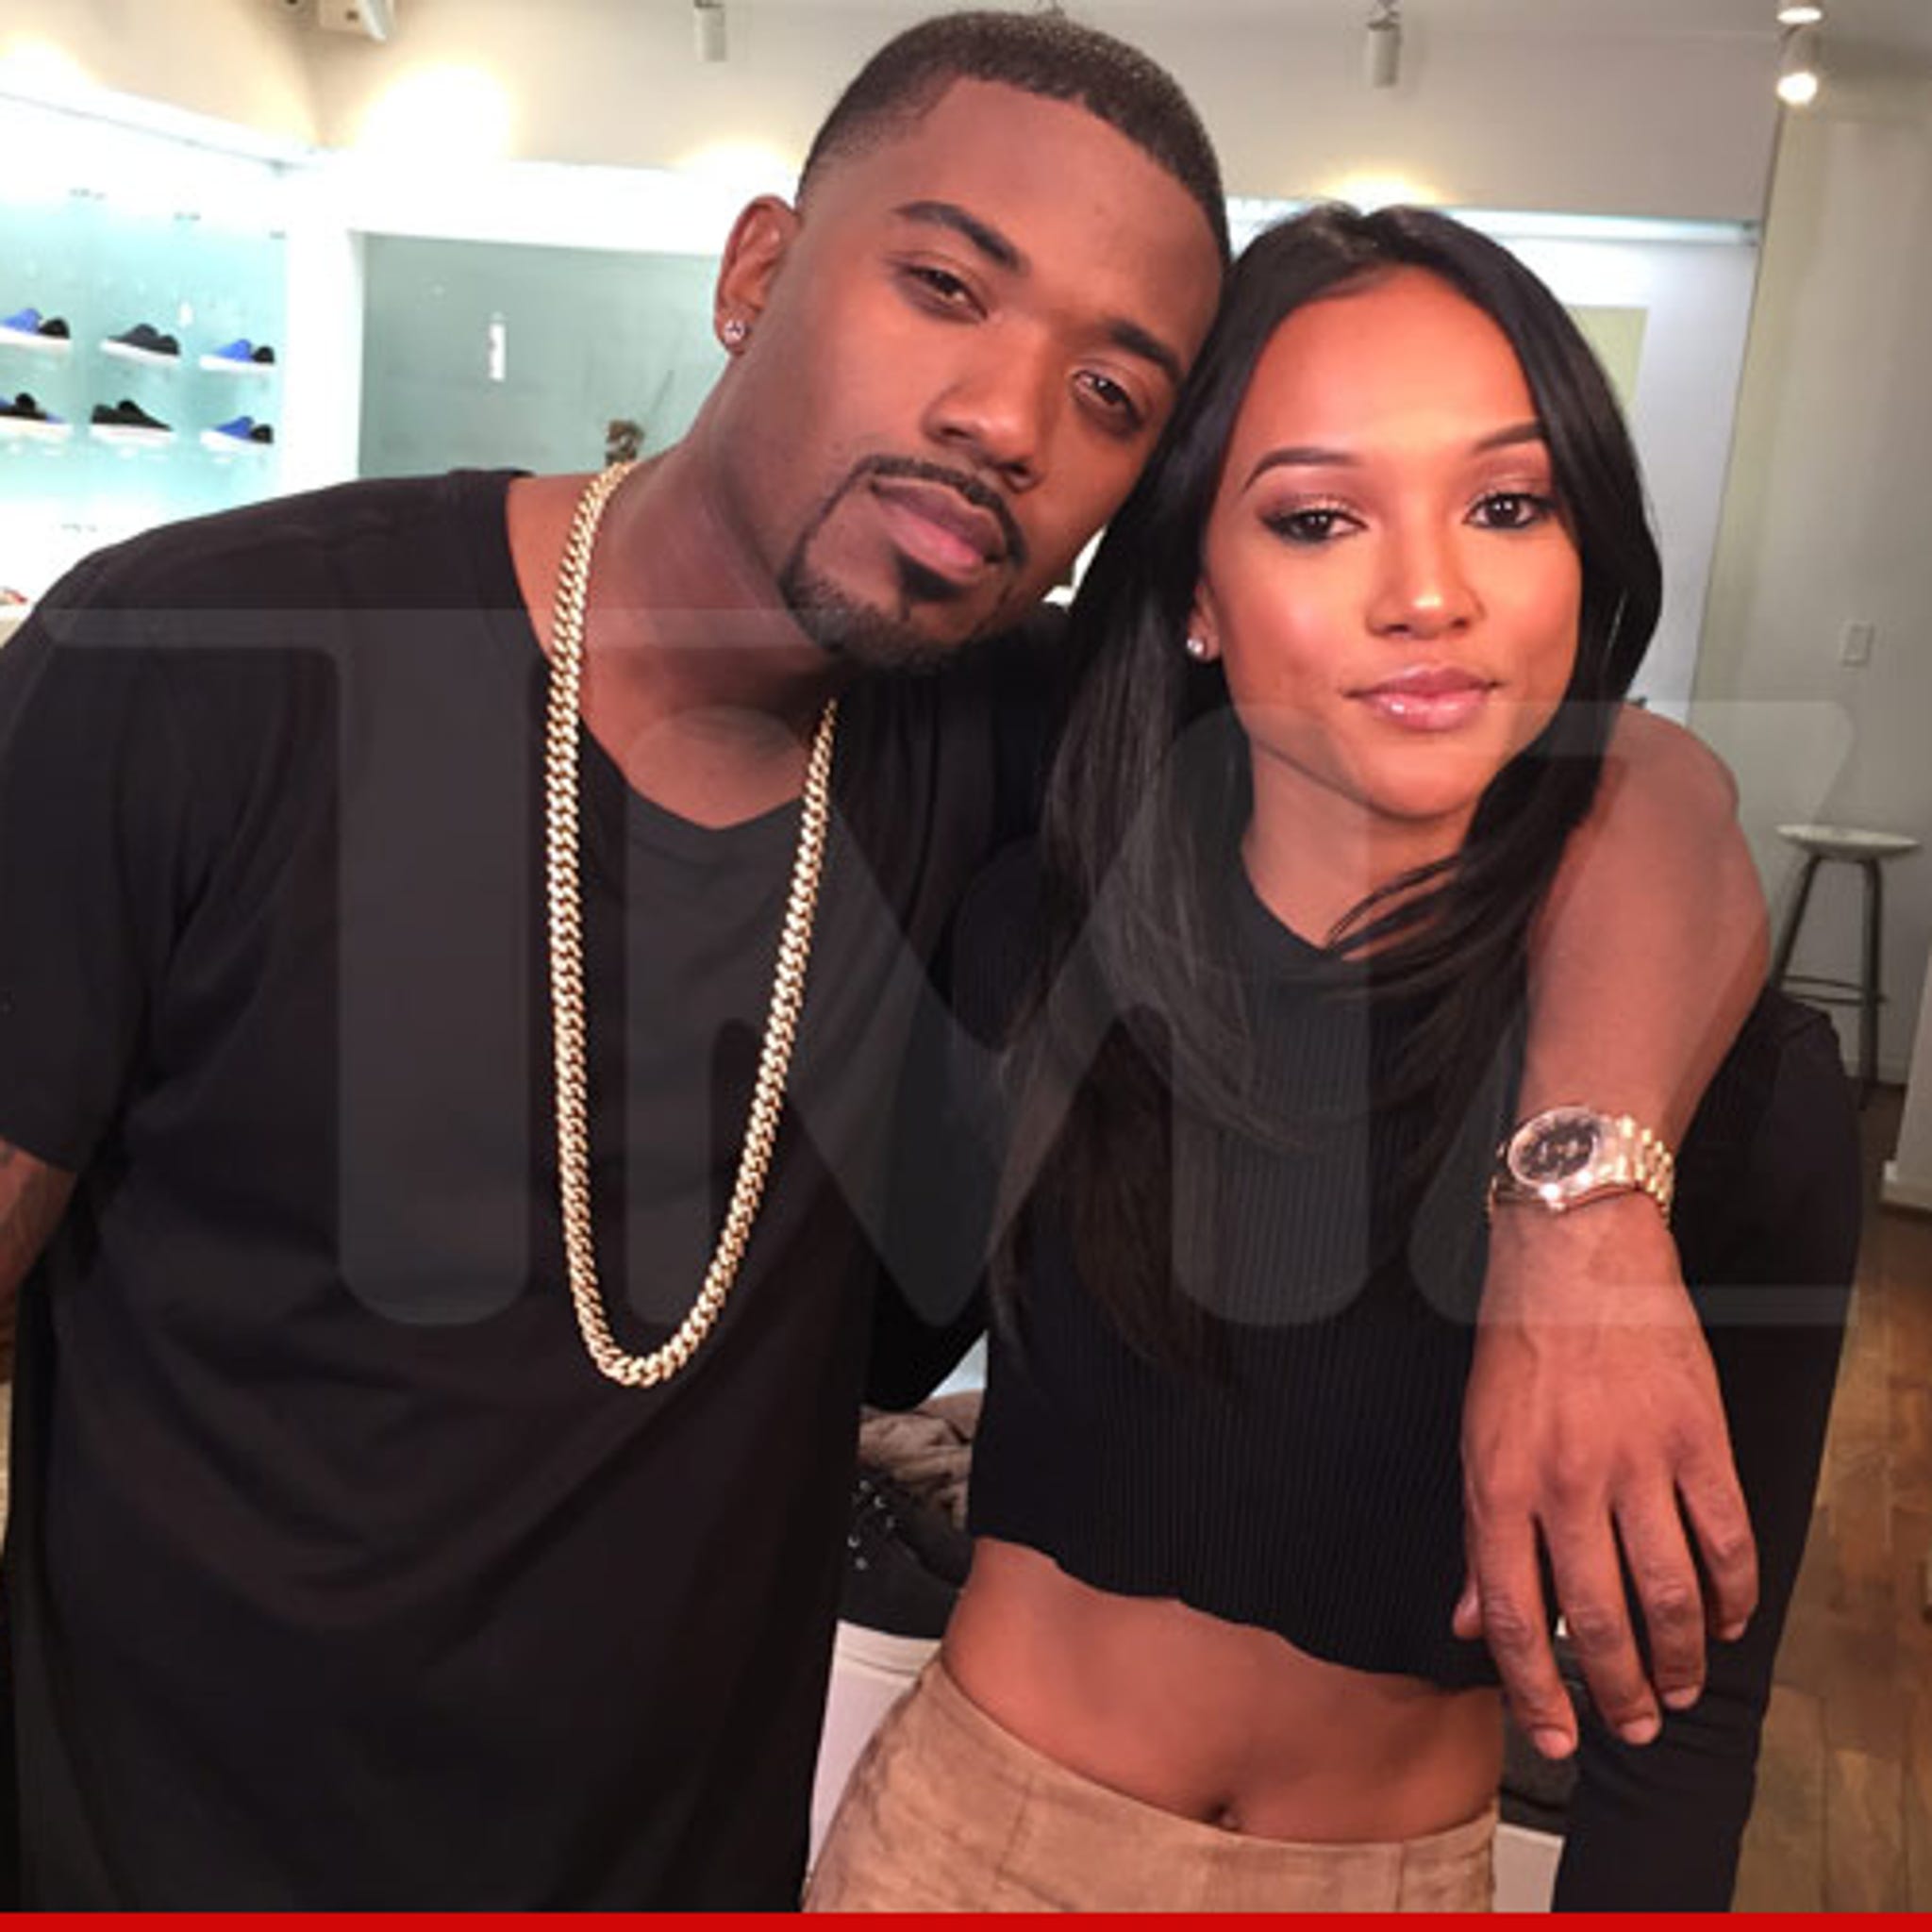 Ray J Ex Gf Threatened Suicide Because Karrueche S In The Picture